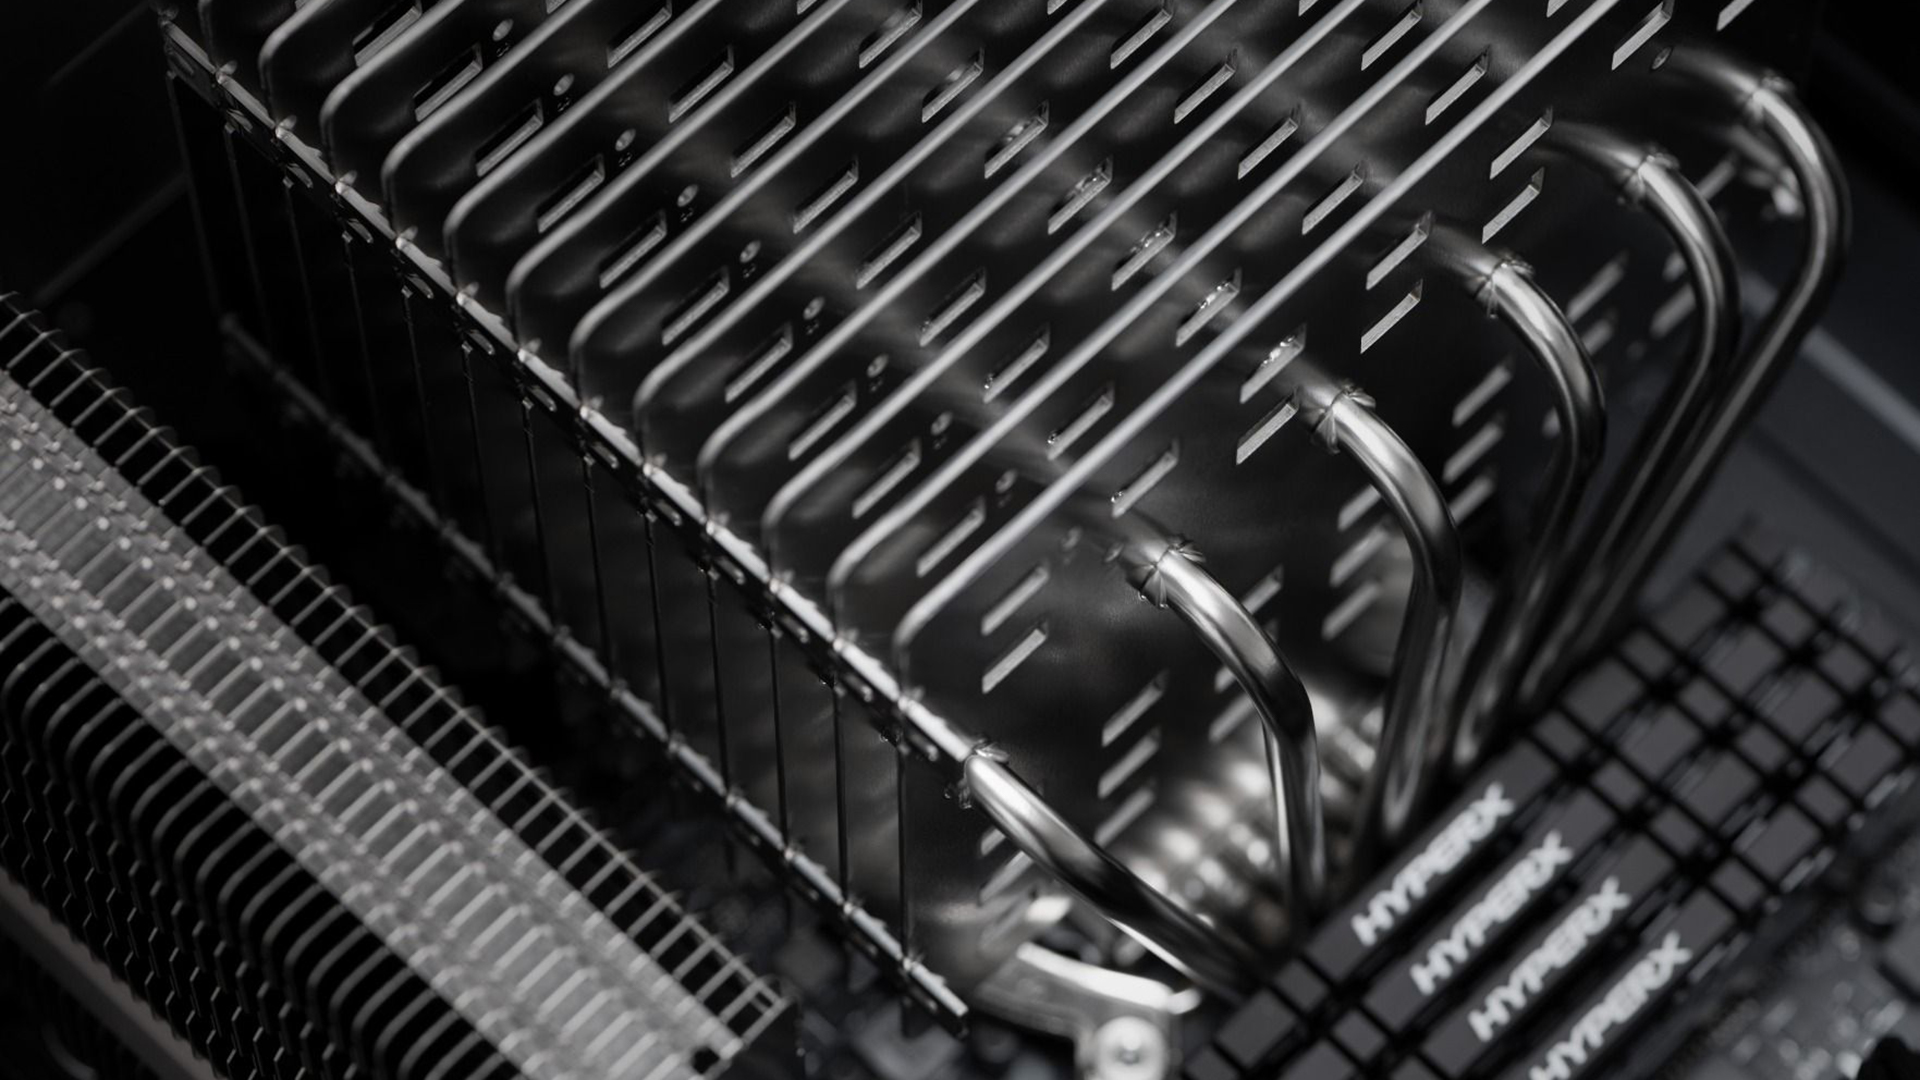  Sit back, relax, and chill to Noctua's utterly ASMR passive PC build vid 